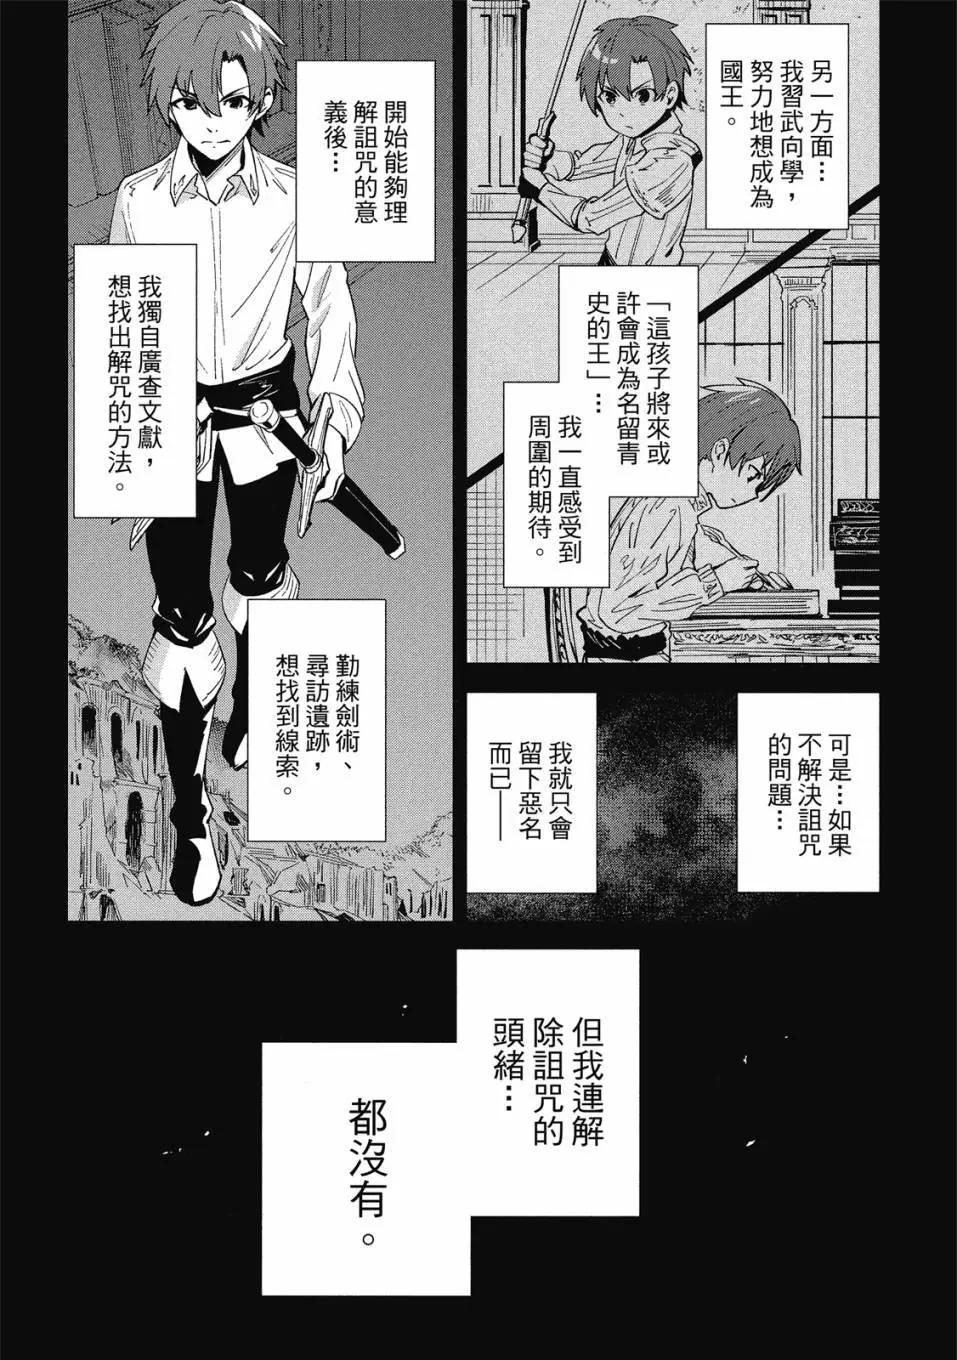 Unnamed Memory - 第01卷(1/4) - 8